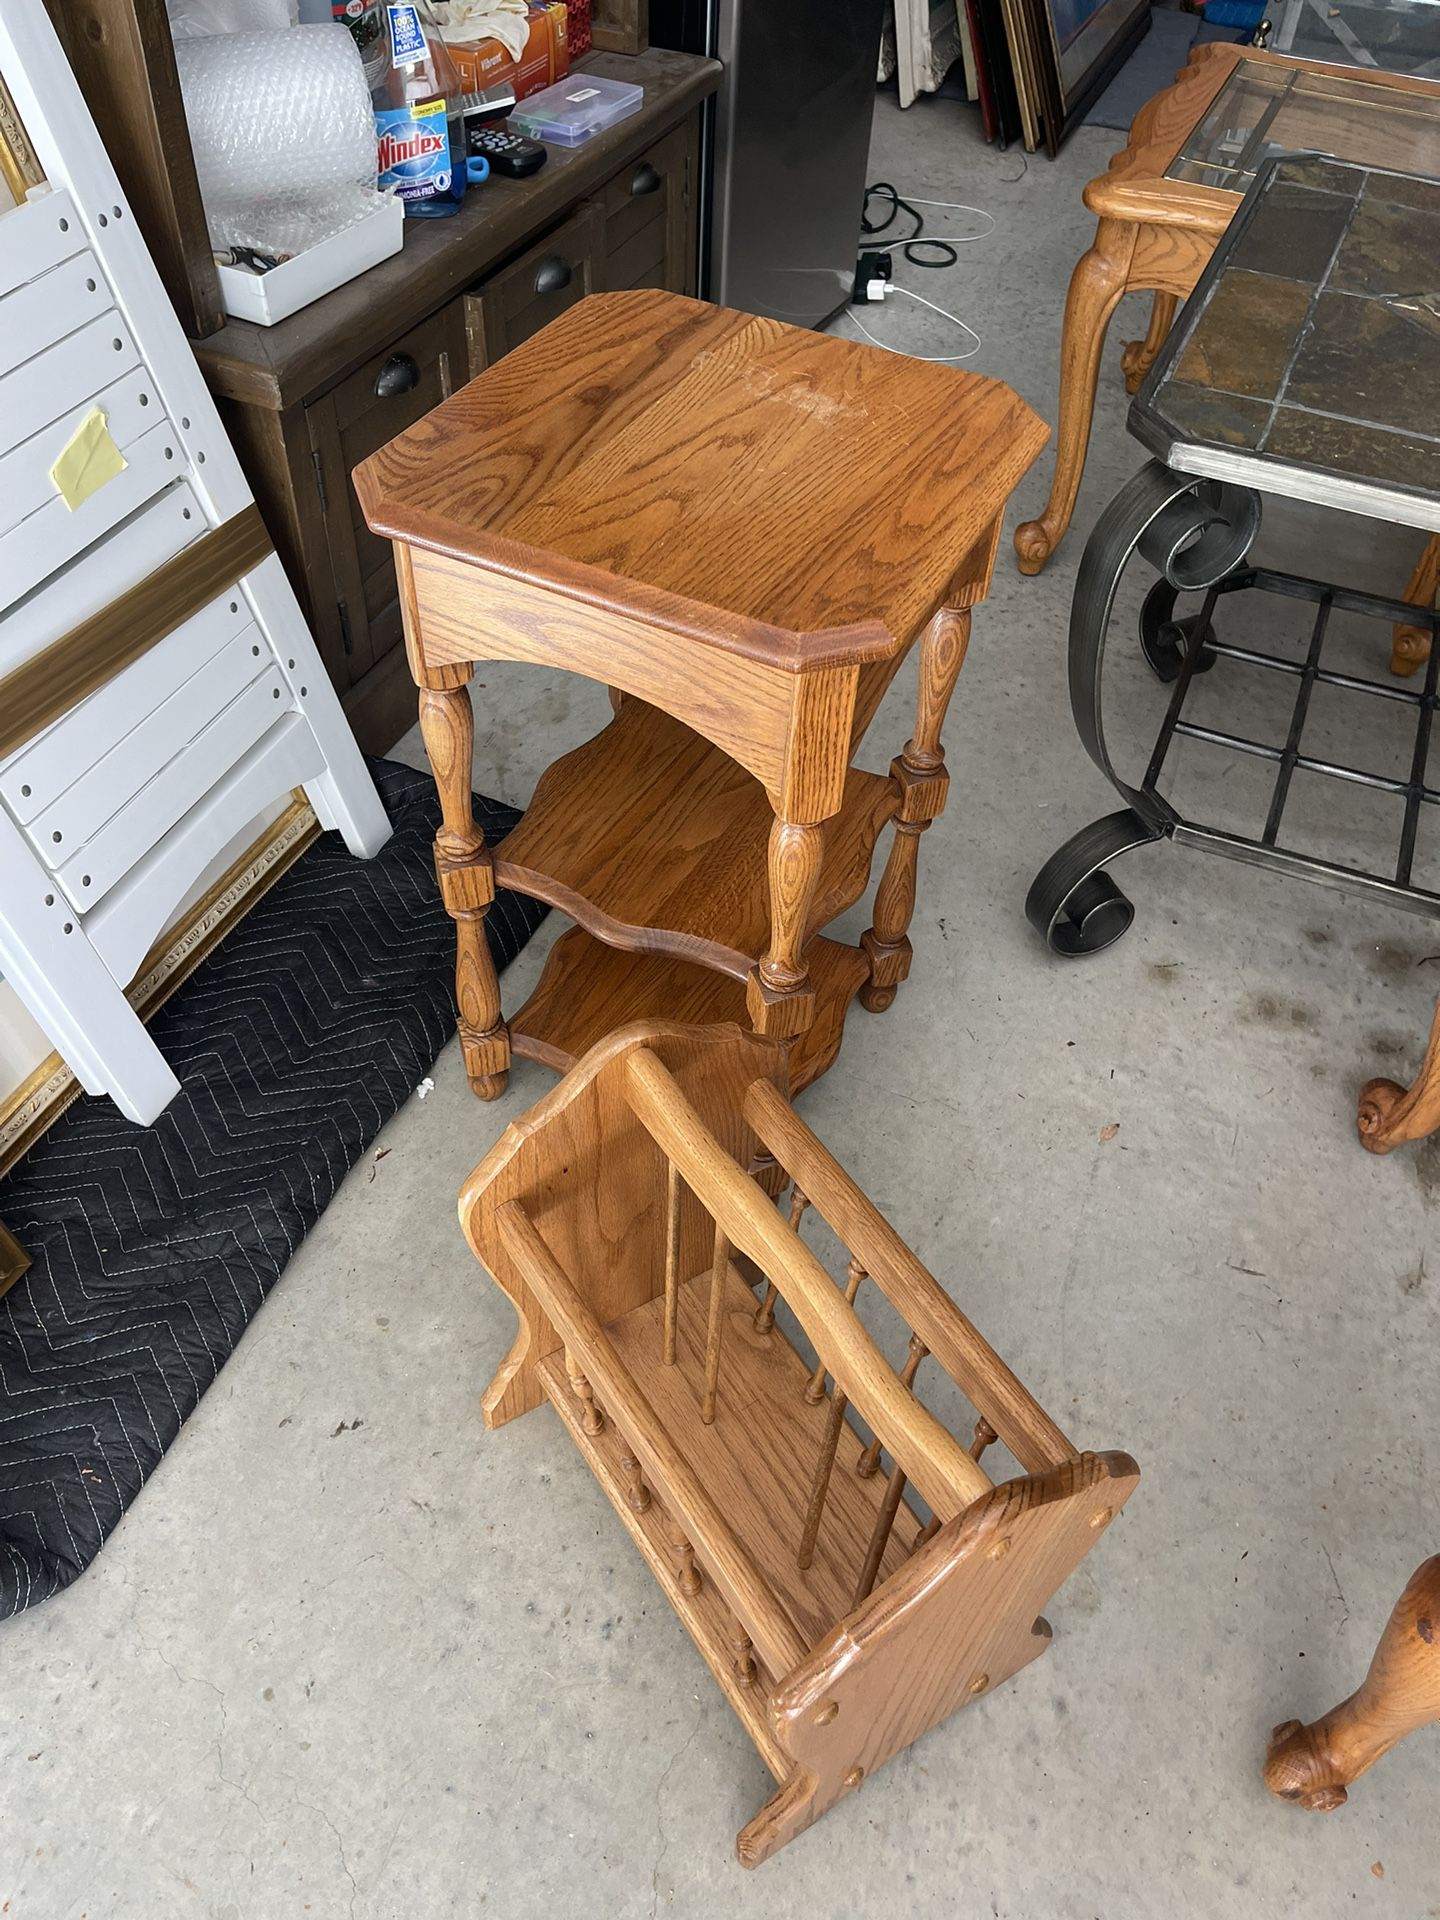 Small Side Table & Magazine Rack - $30